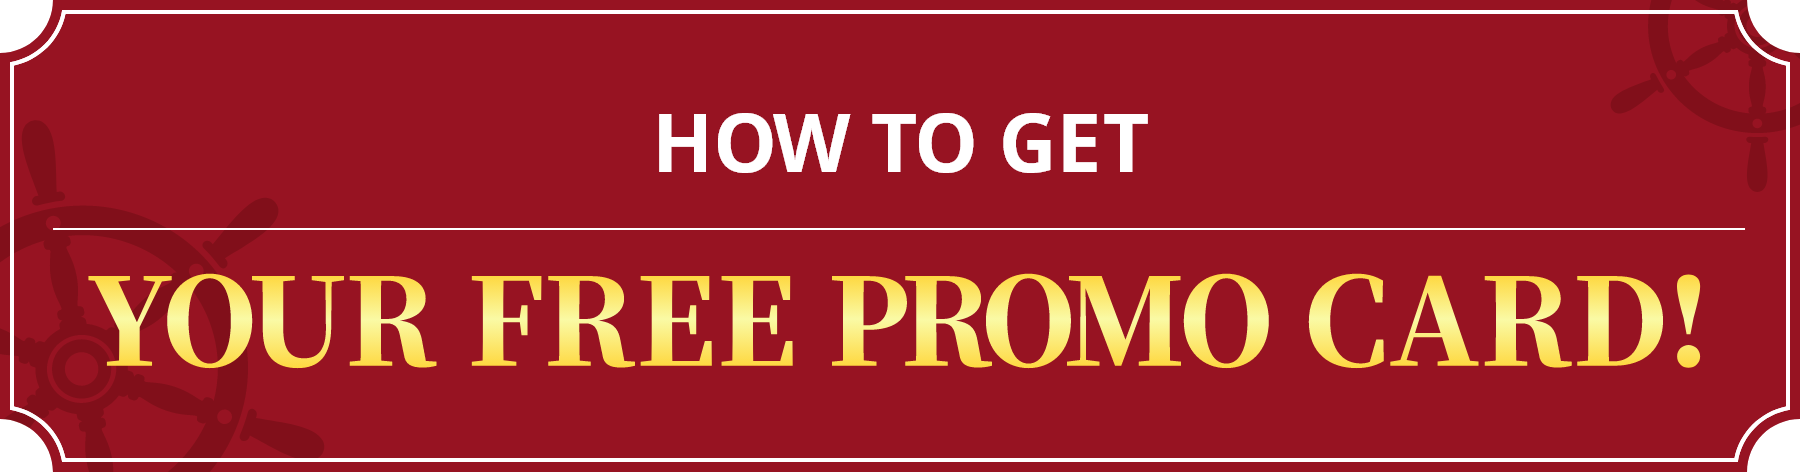 HOW TO GET YOUR FREE PROMO CARD!